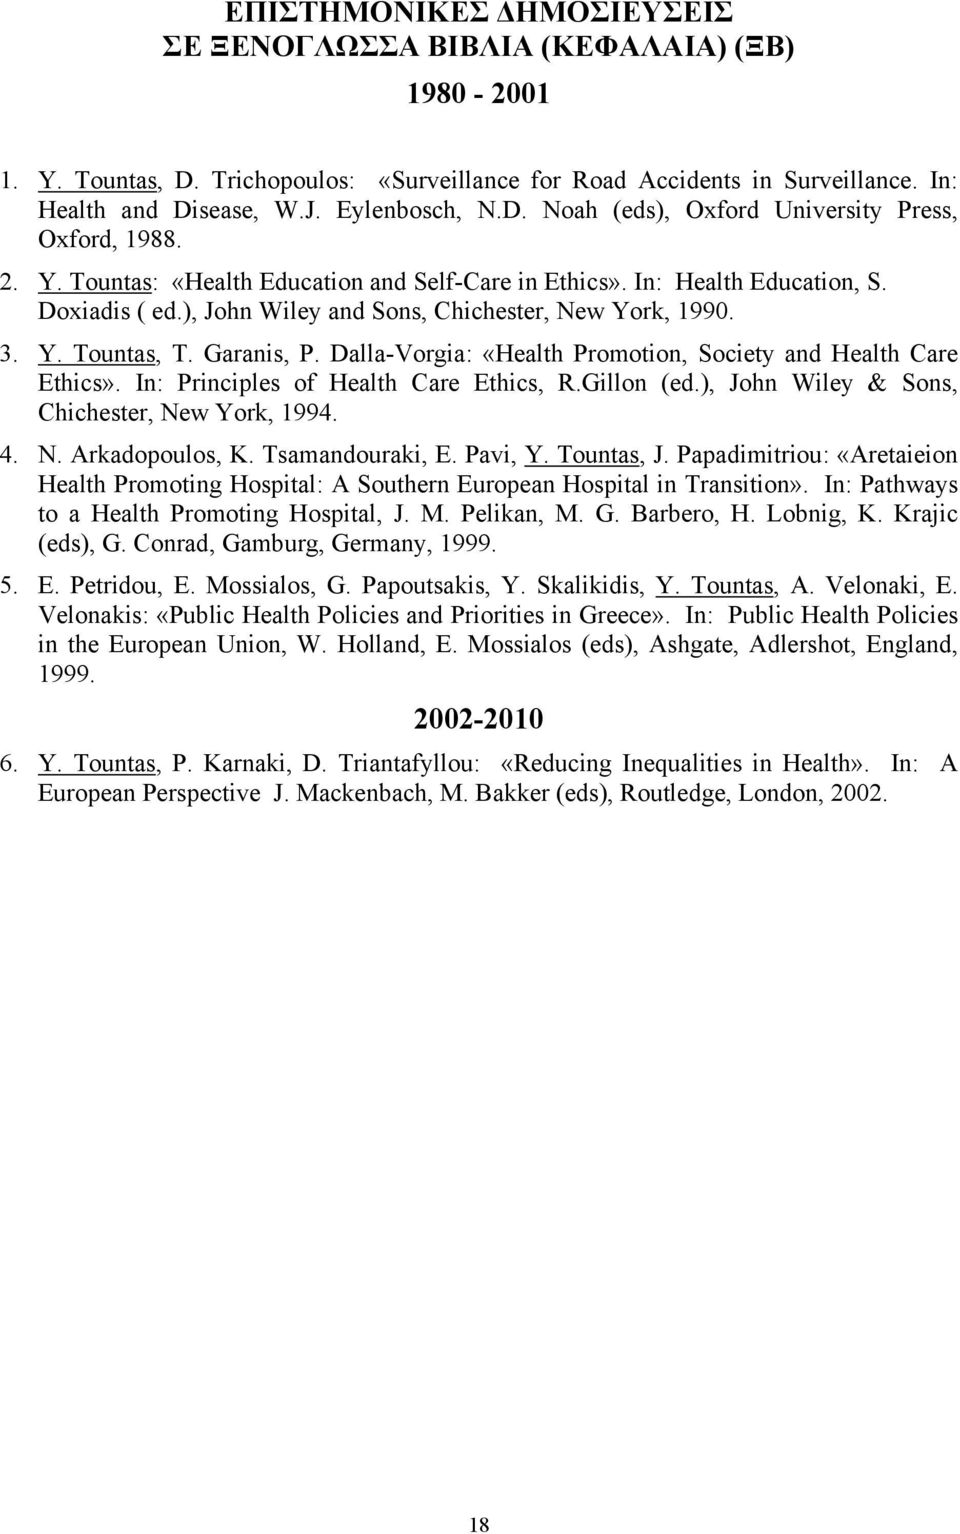 ), John Wiley and Sons, Chichester, New York, 1990. 3. Y. Tountas, T. Garanis, P. Dalla-Vorgia: «Health Promotion, Society and Health Care Ethics». In: Principles of Health Care Ethics, R.Gillon (ed.